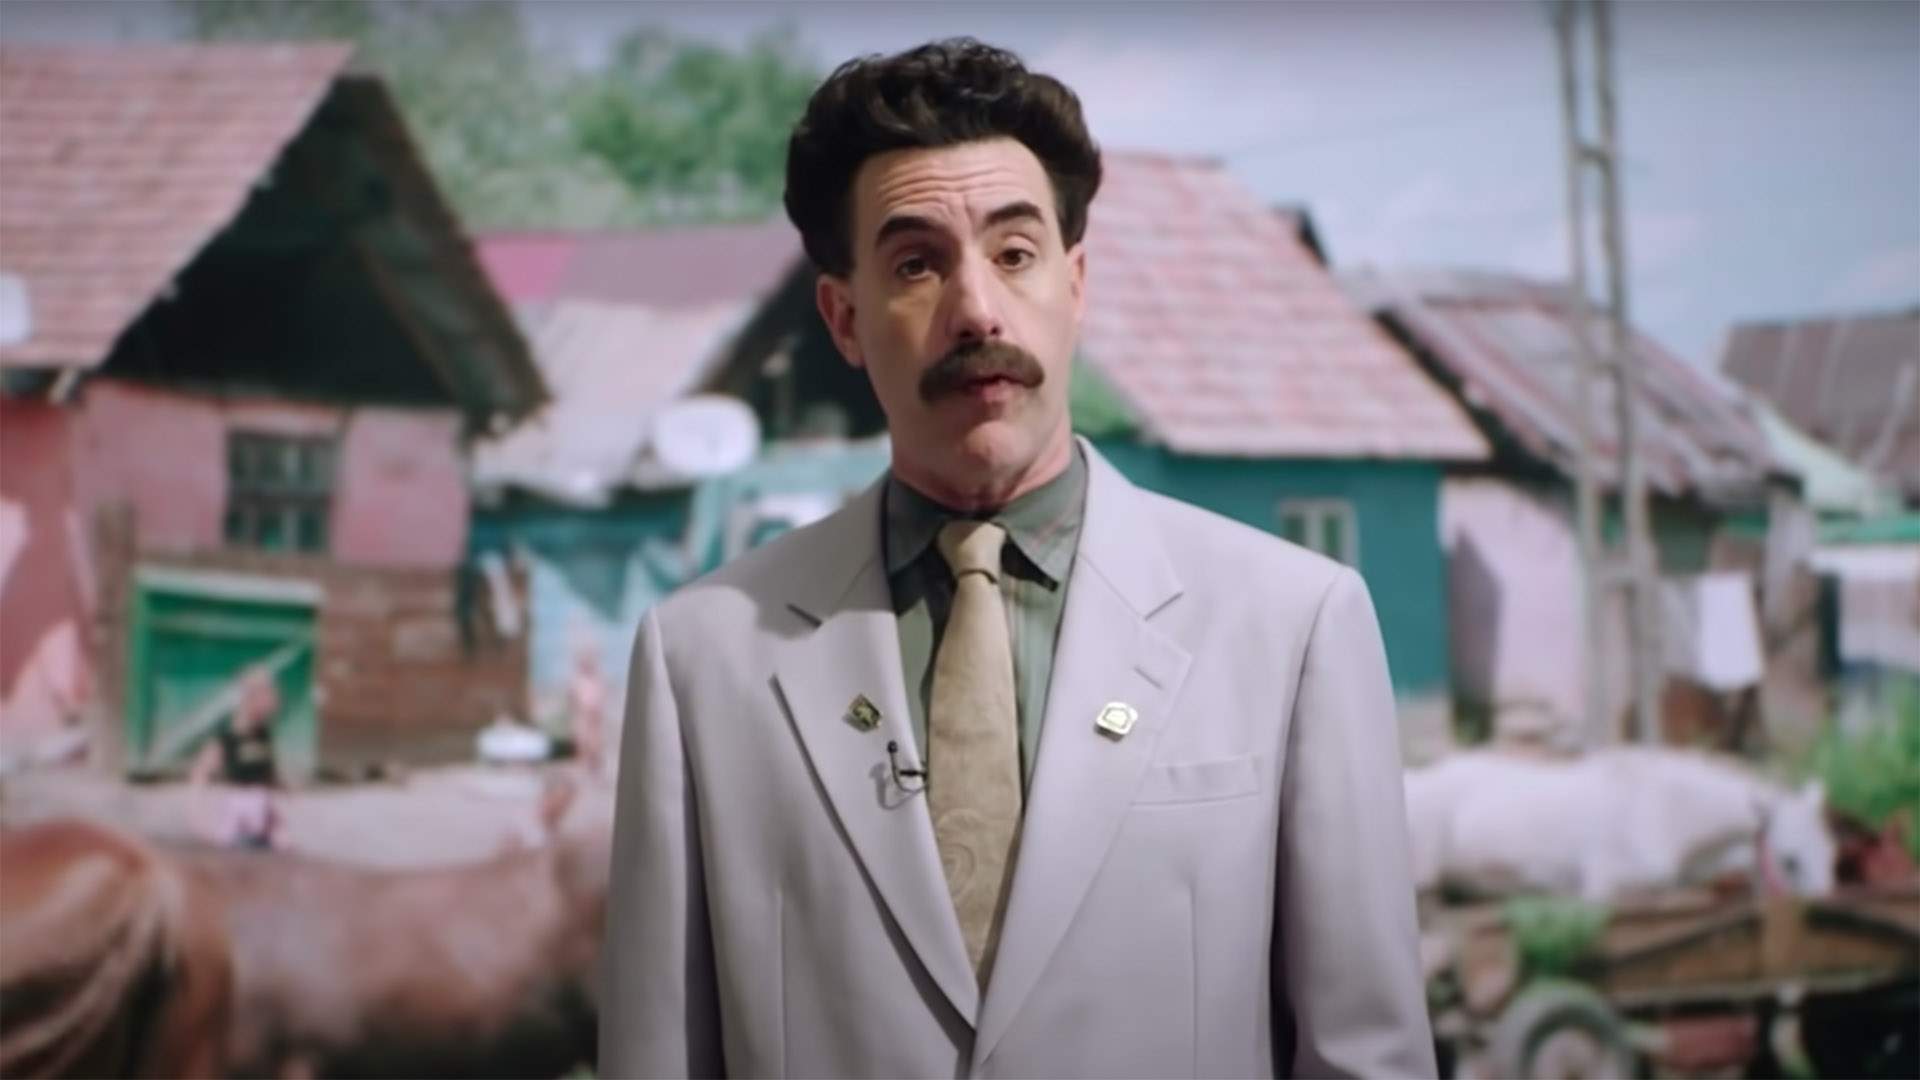 A New 'Borat' Special Is Coming to Amazon Prime Video If You Need Something Very Nice to Watch